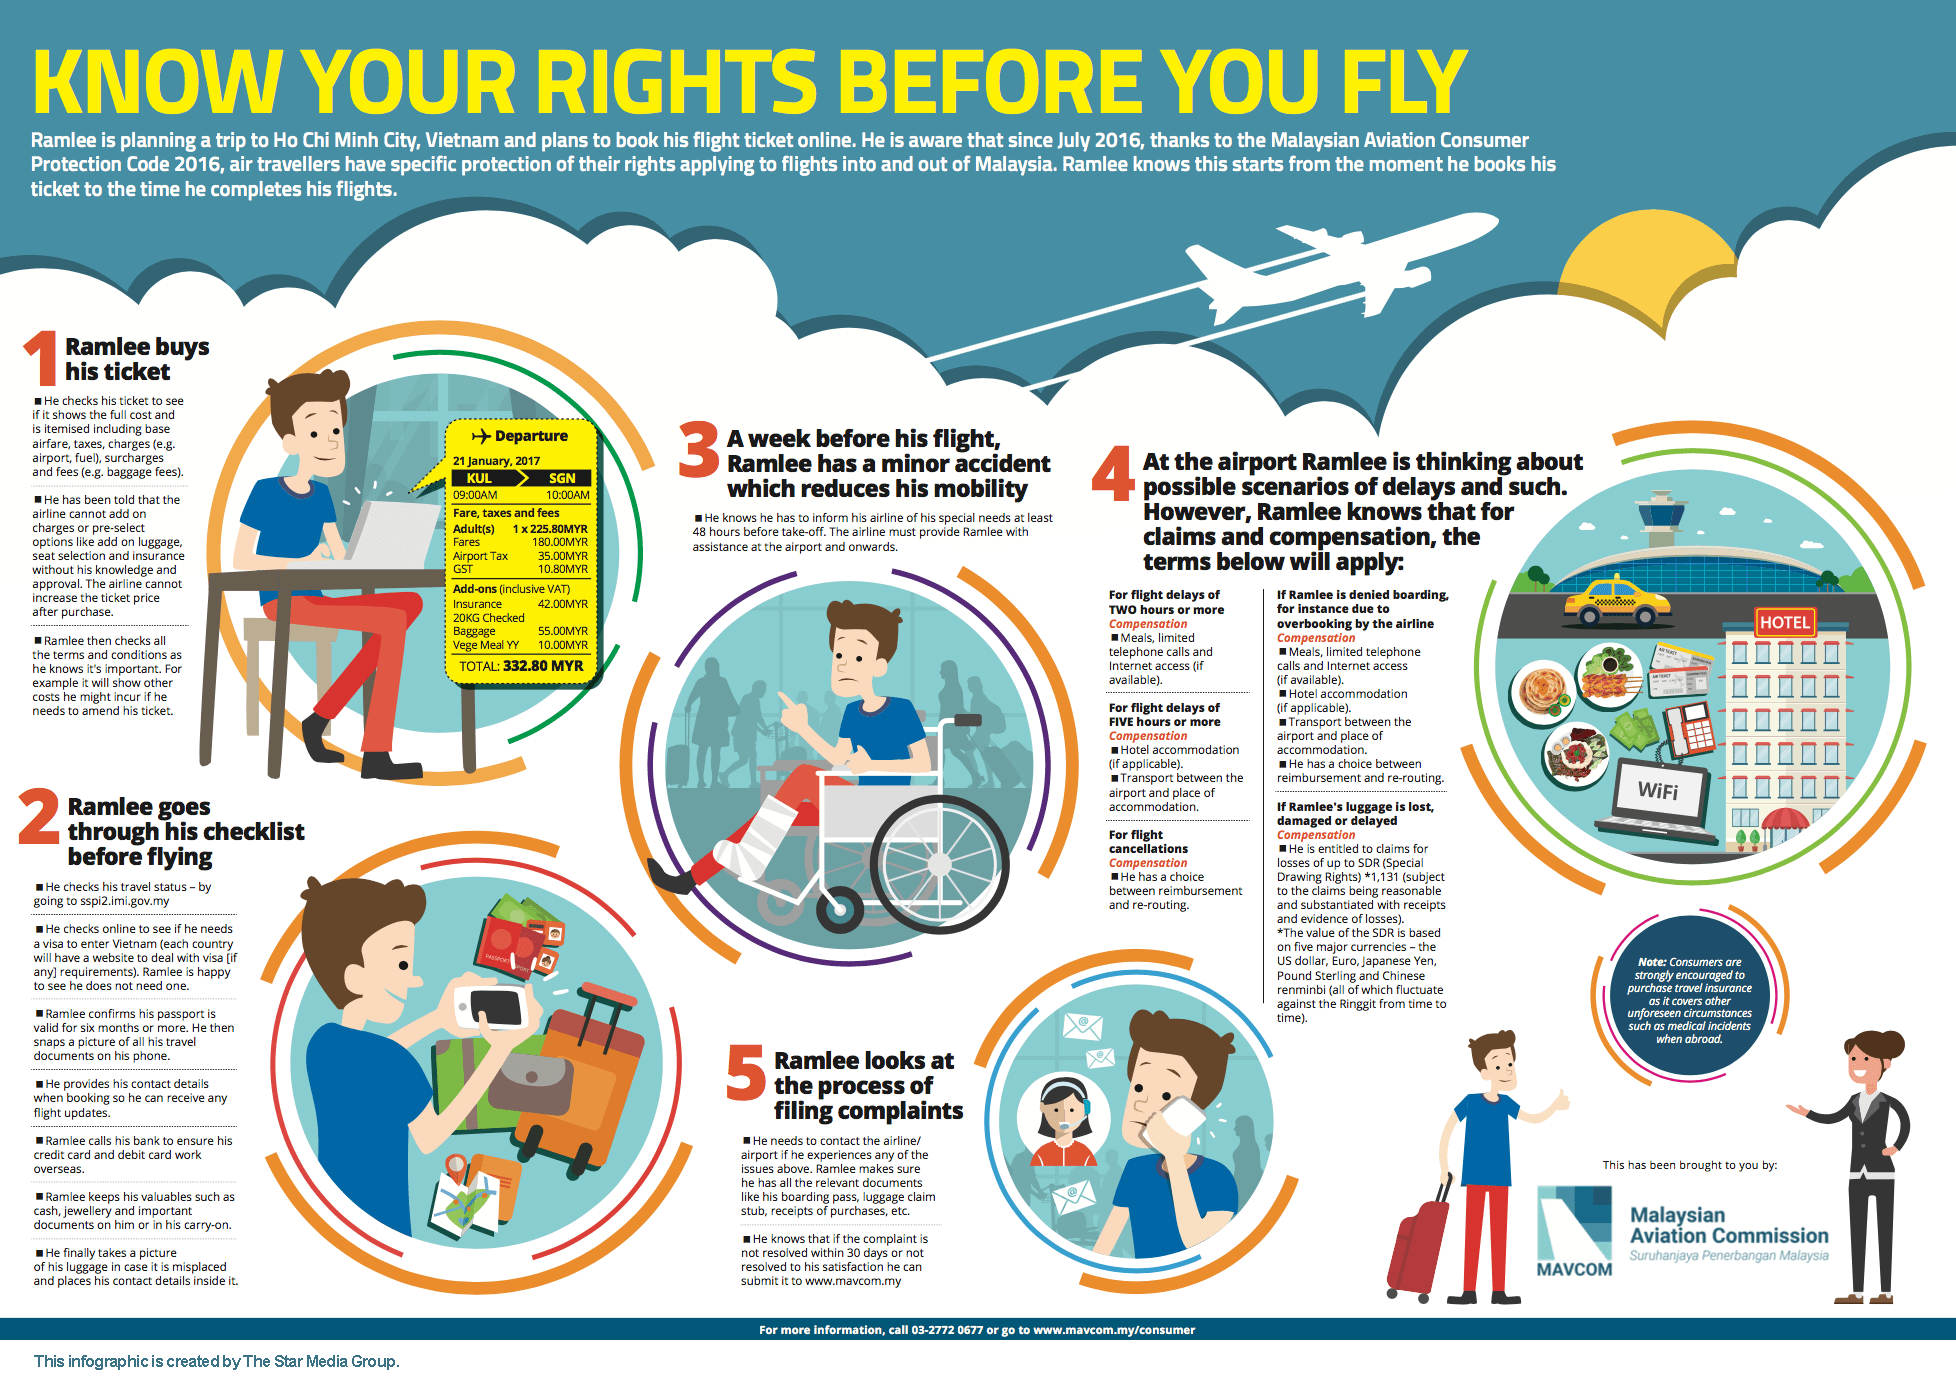 mavcom-infogrphic-know-your-rights-before-you-fly-2017-jan21